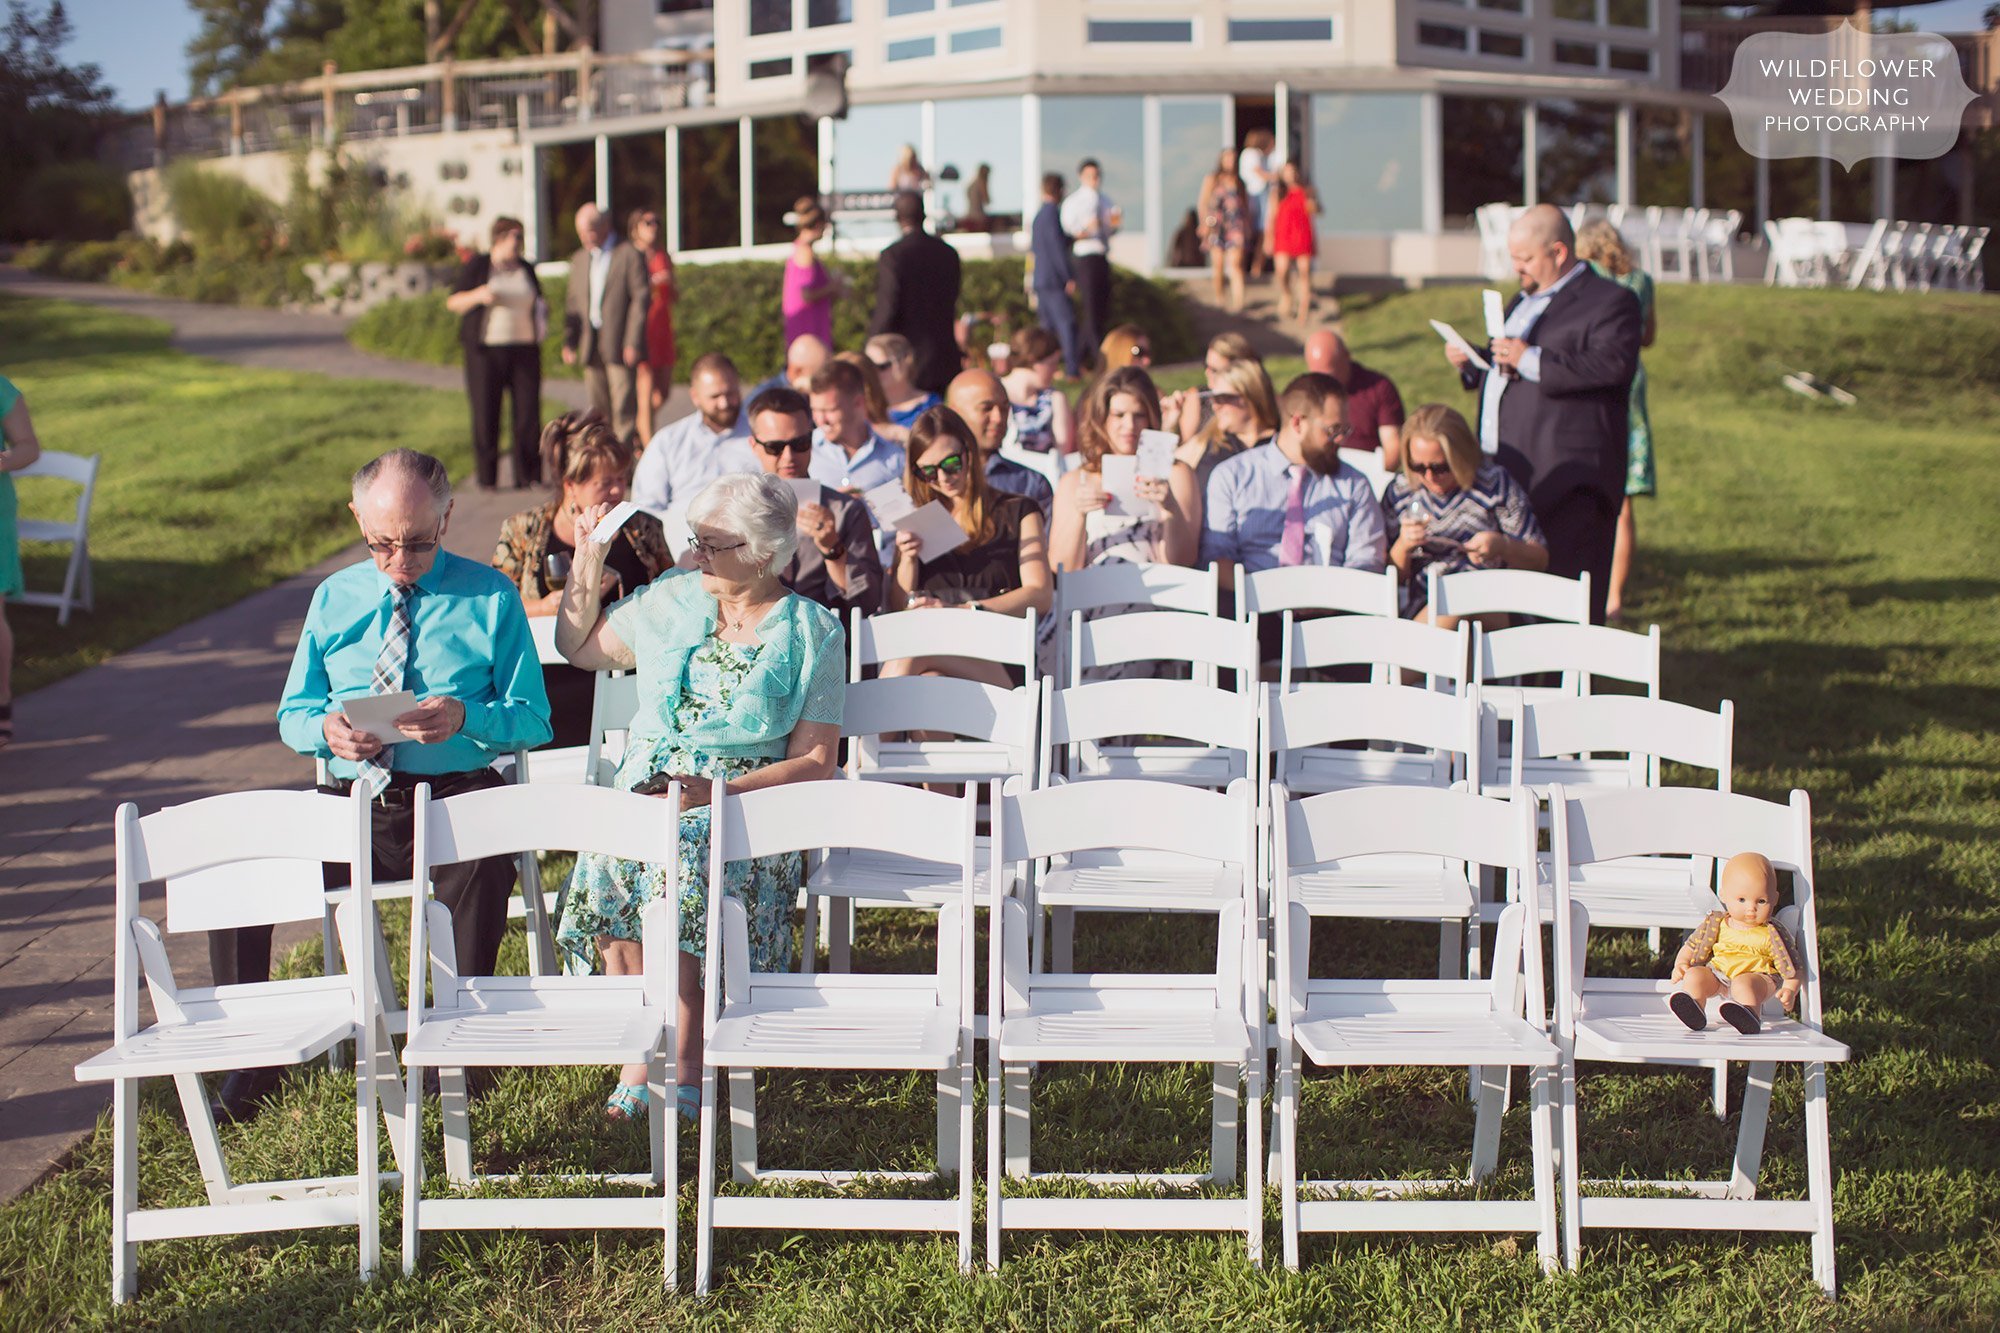 funny wedding ceremony scene with a baby doll in a chair at outdoor ceremony in rocheport